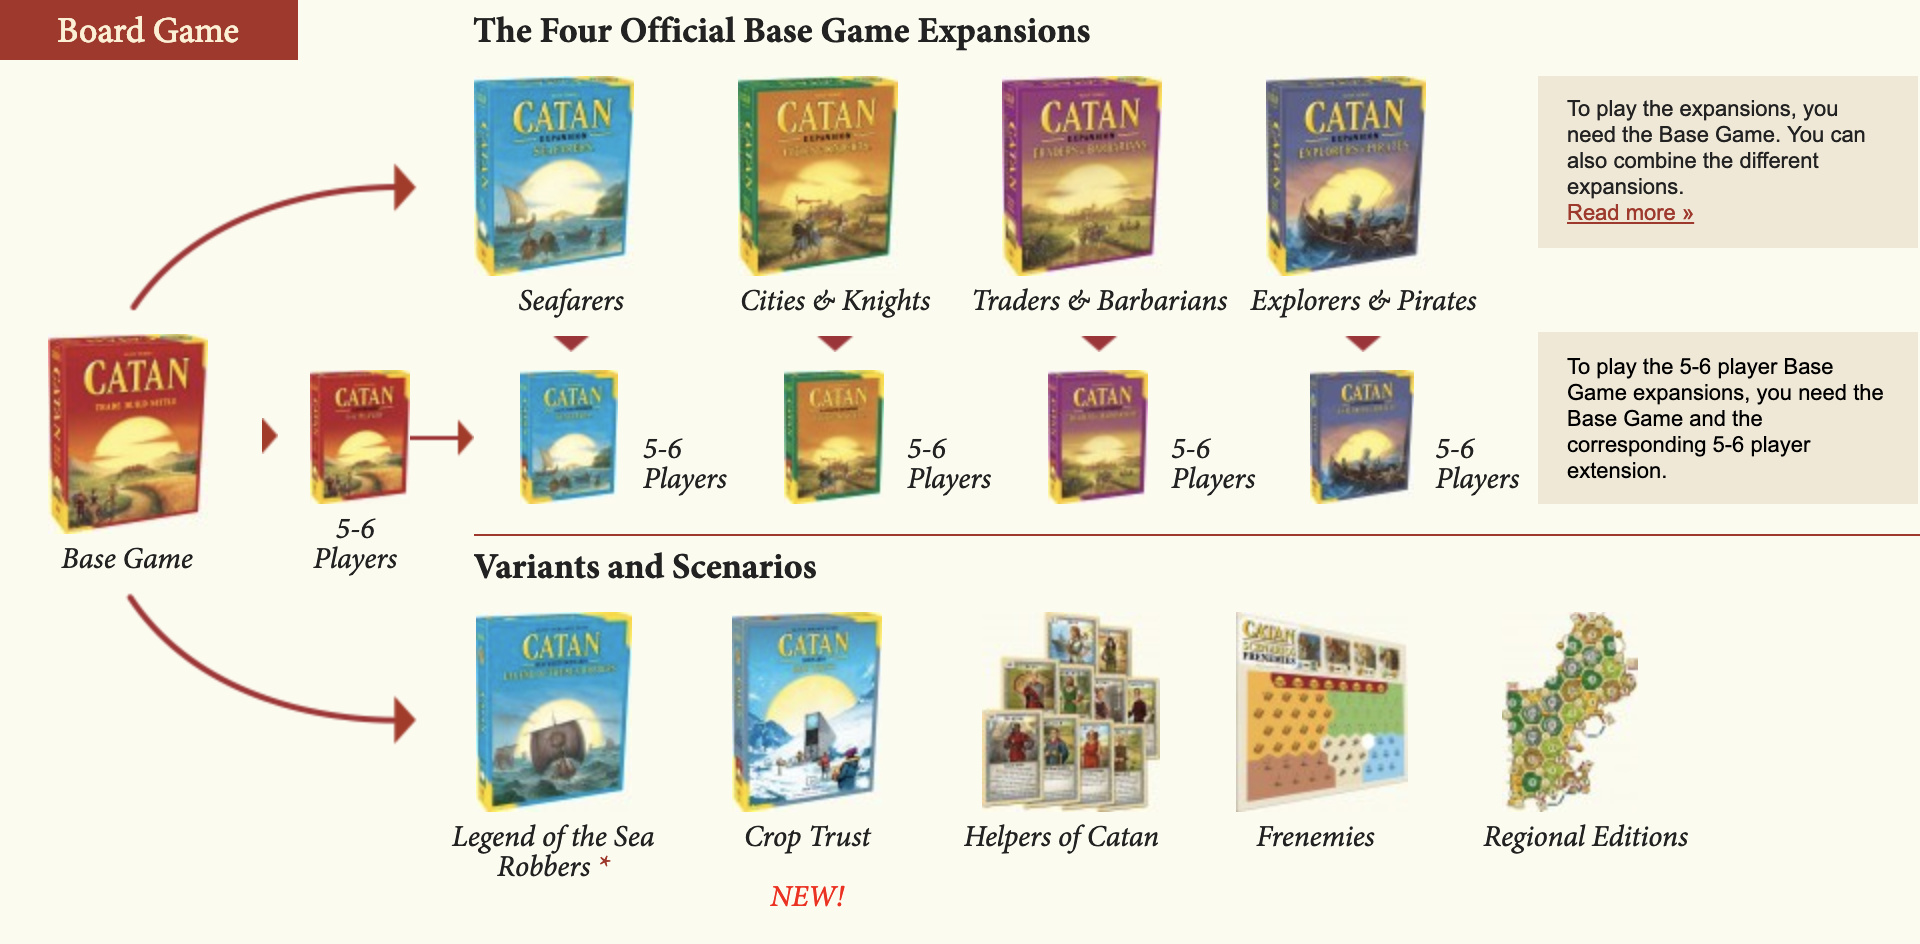 settler of catan cities and knights